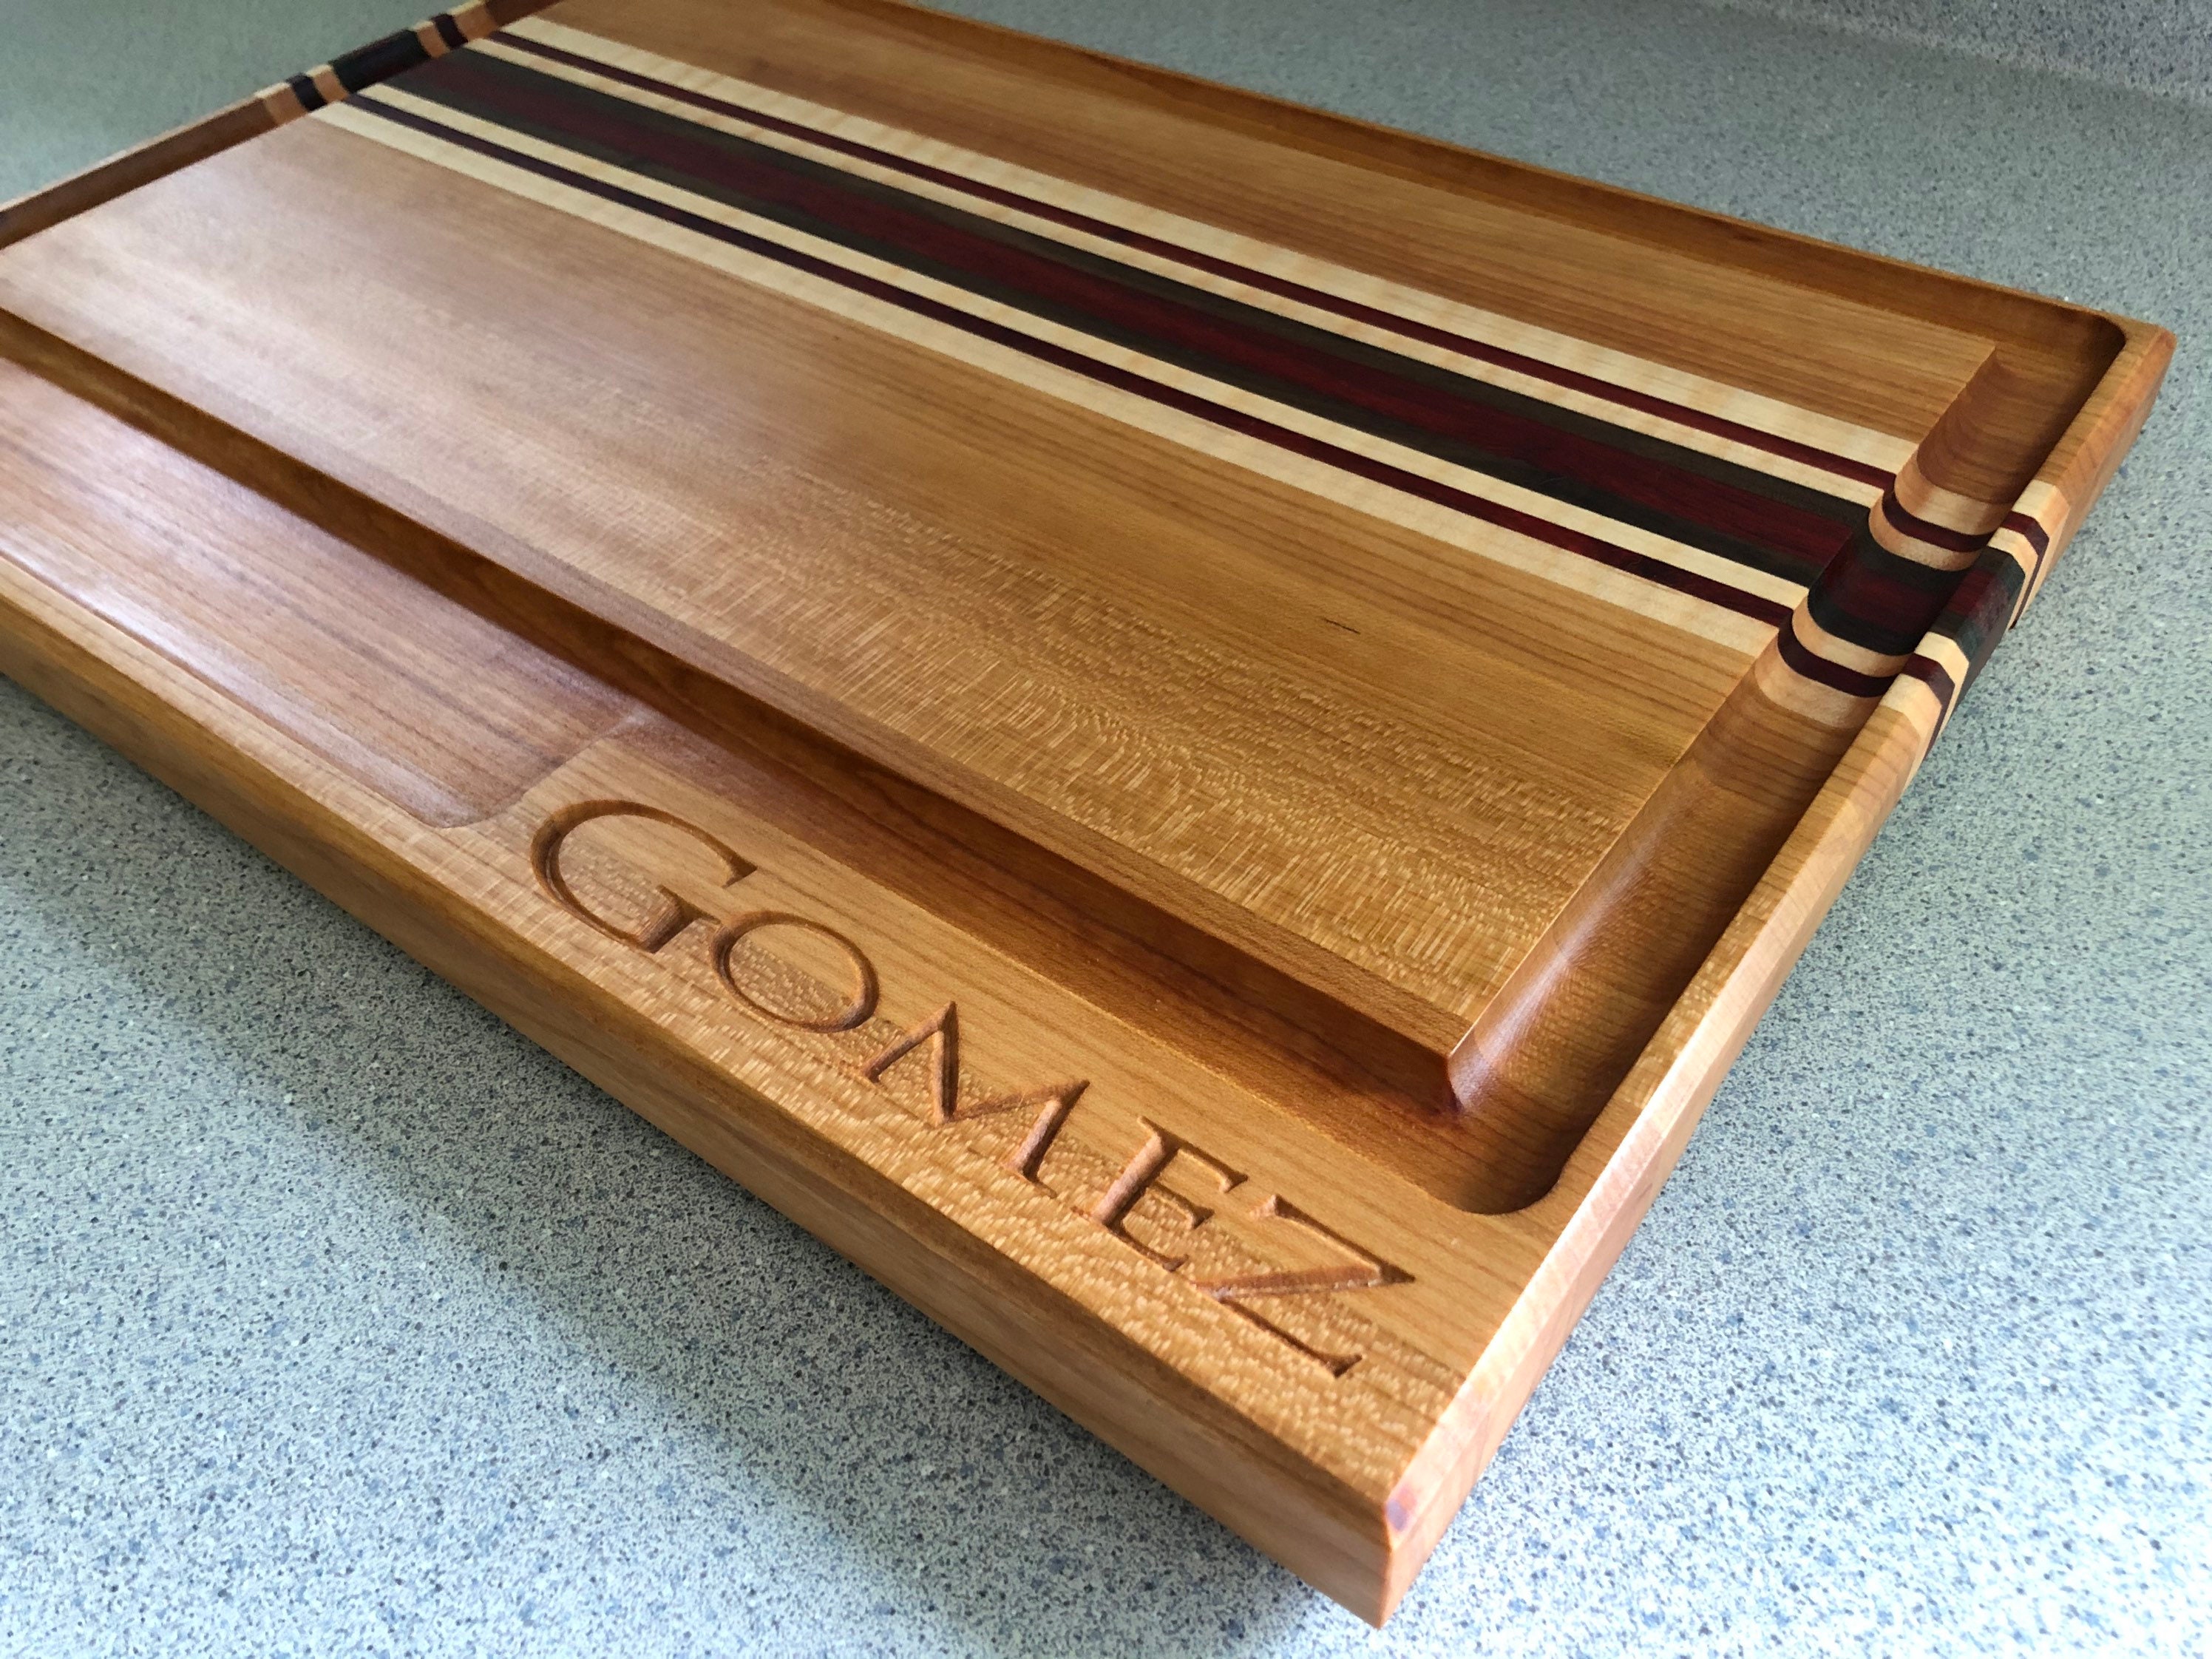 Personalized Wood Cutting Boards – Mountain Edge Designs